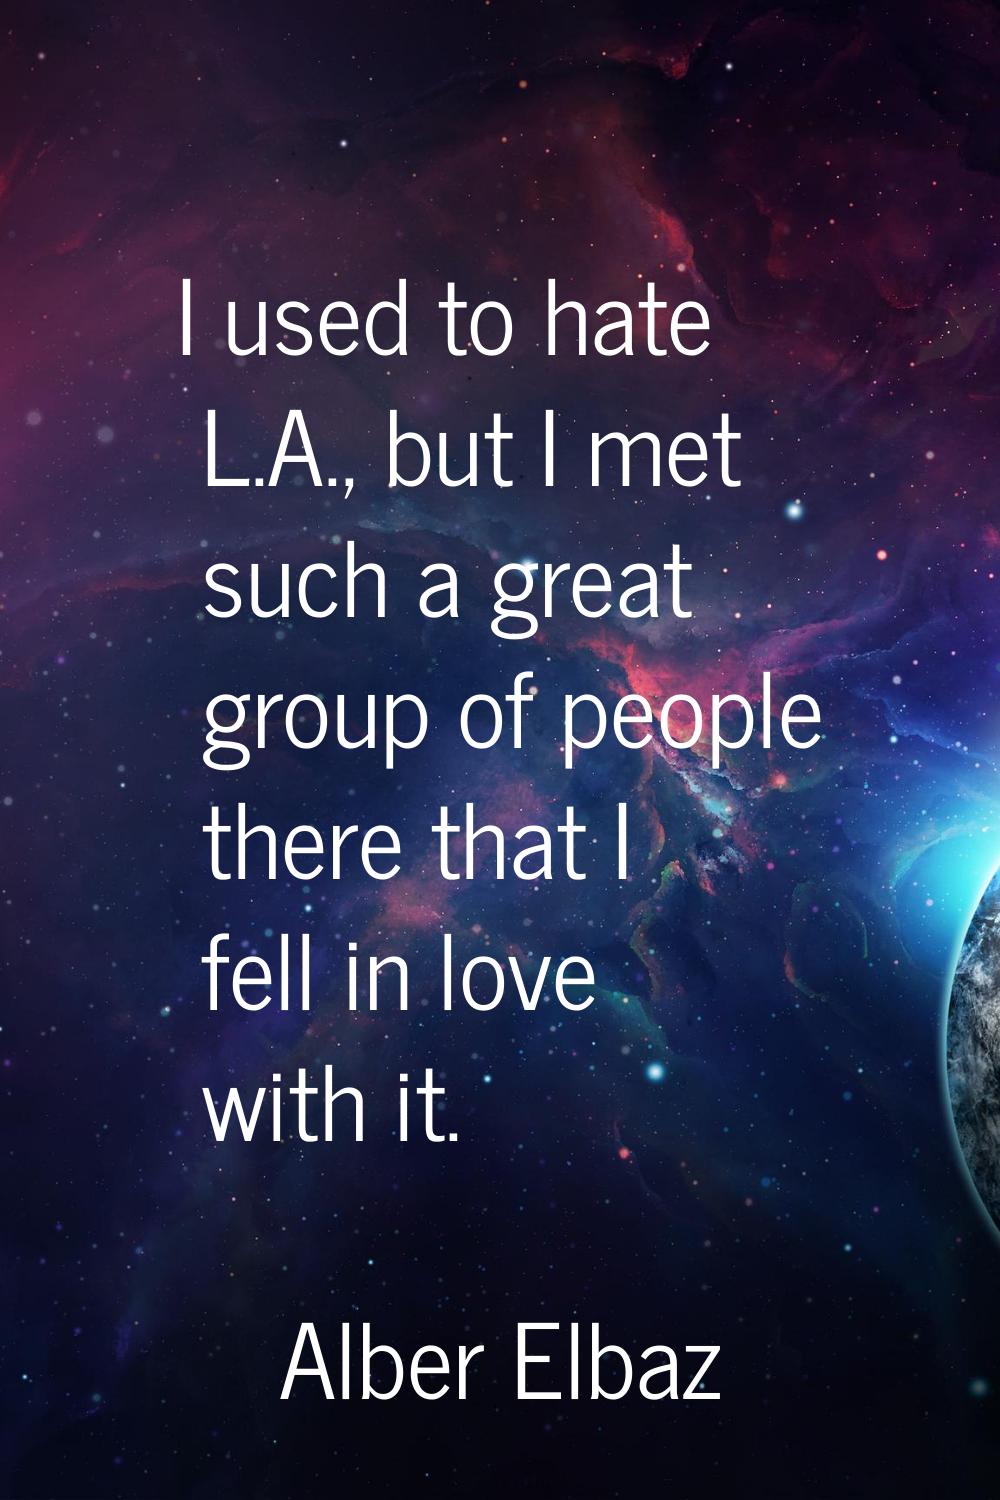 I used to hate L.A., but I met such a great group of people there that I fell in love with it.